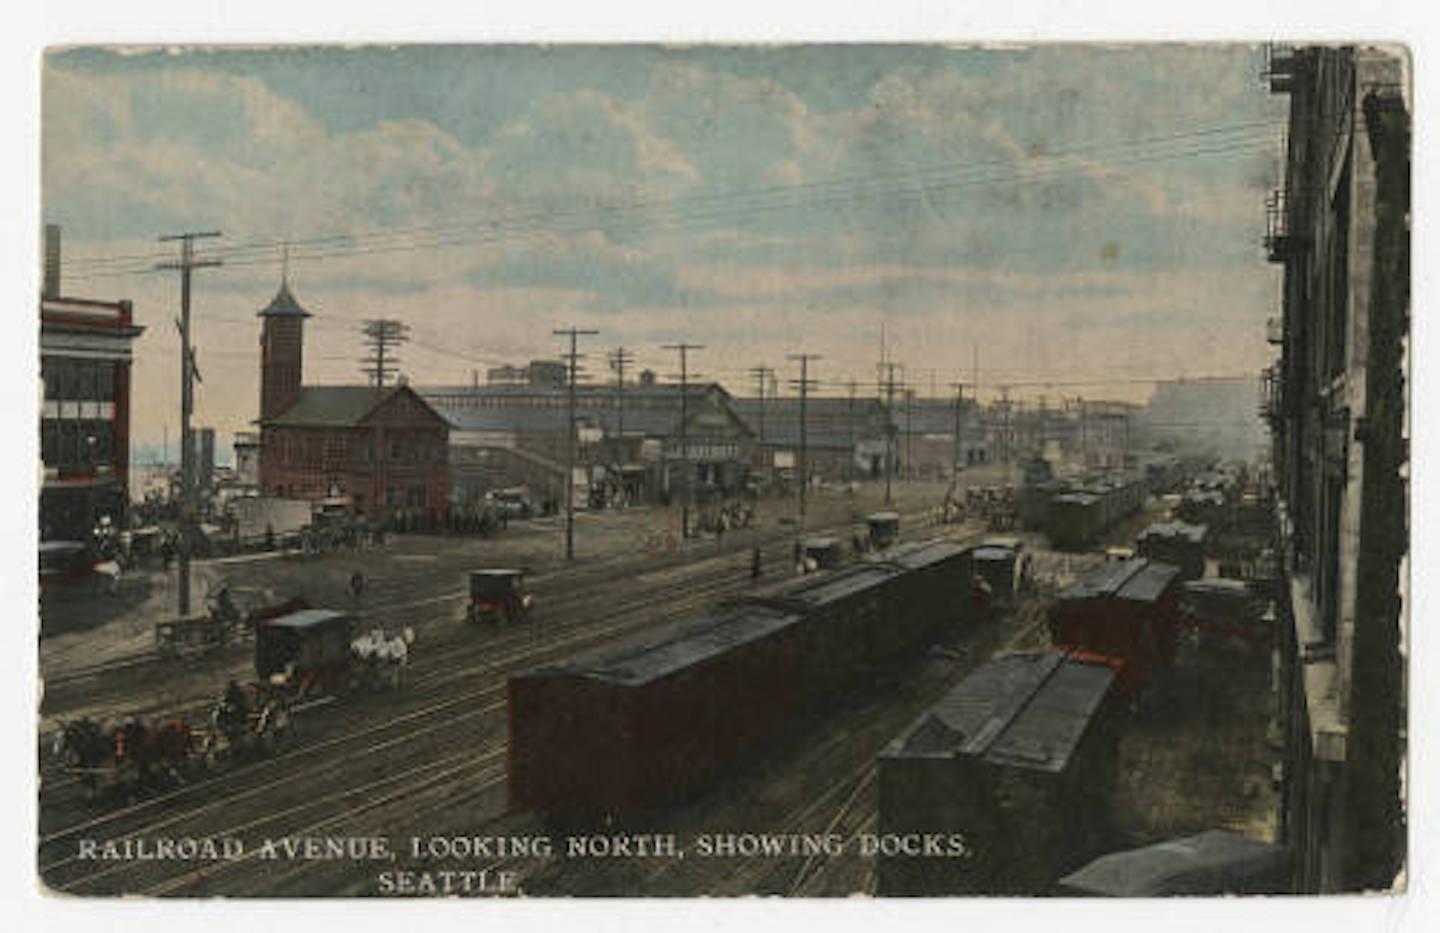 In the foreground are railroad tracks, in the distance are buildings and beyond them the waterfront, the sky is painted blue with some fluffy clouds.